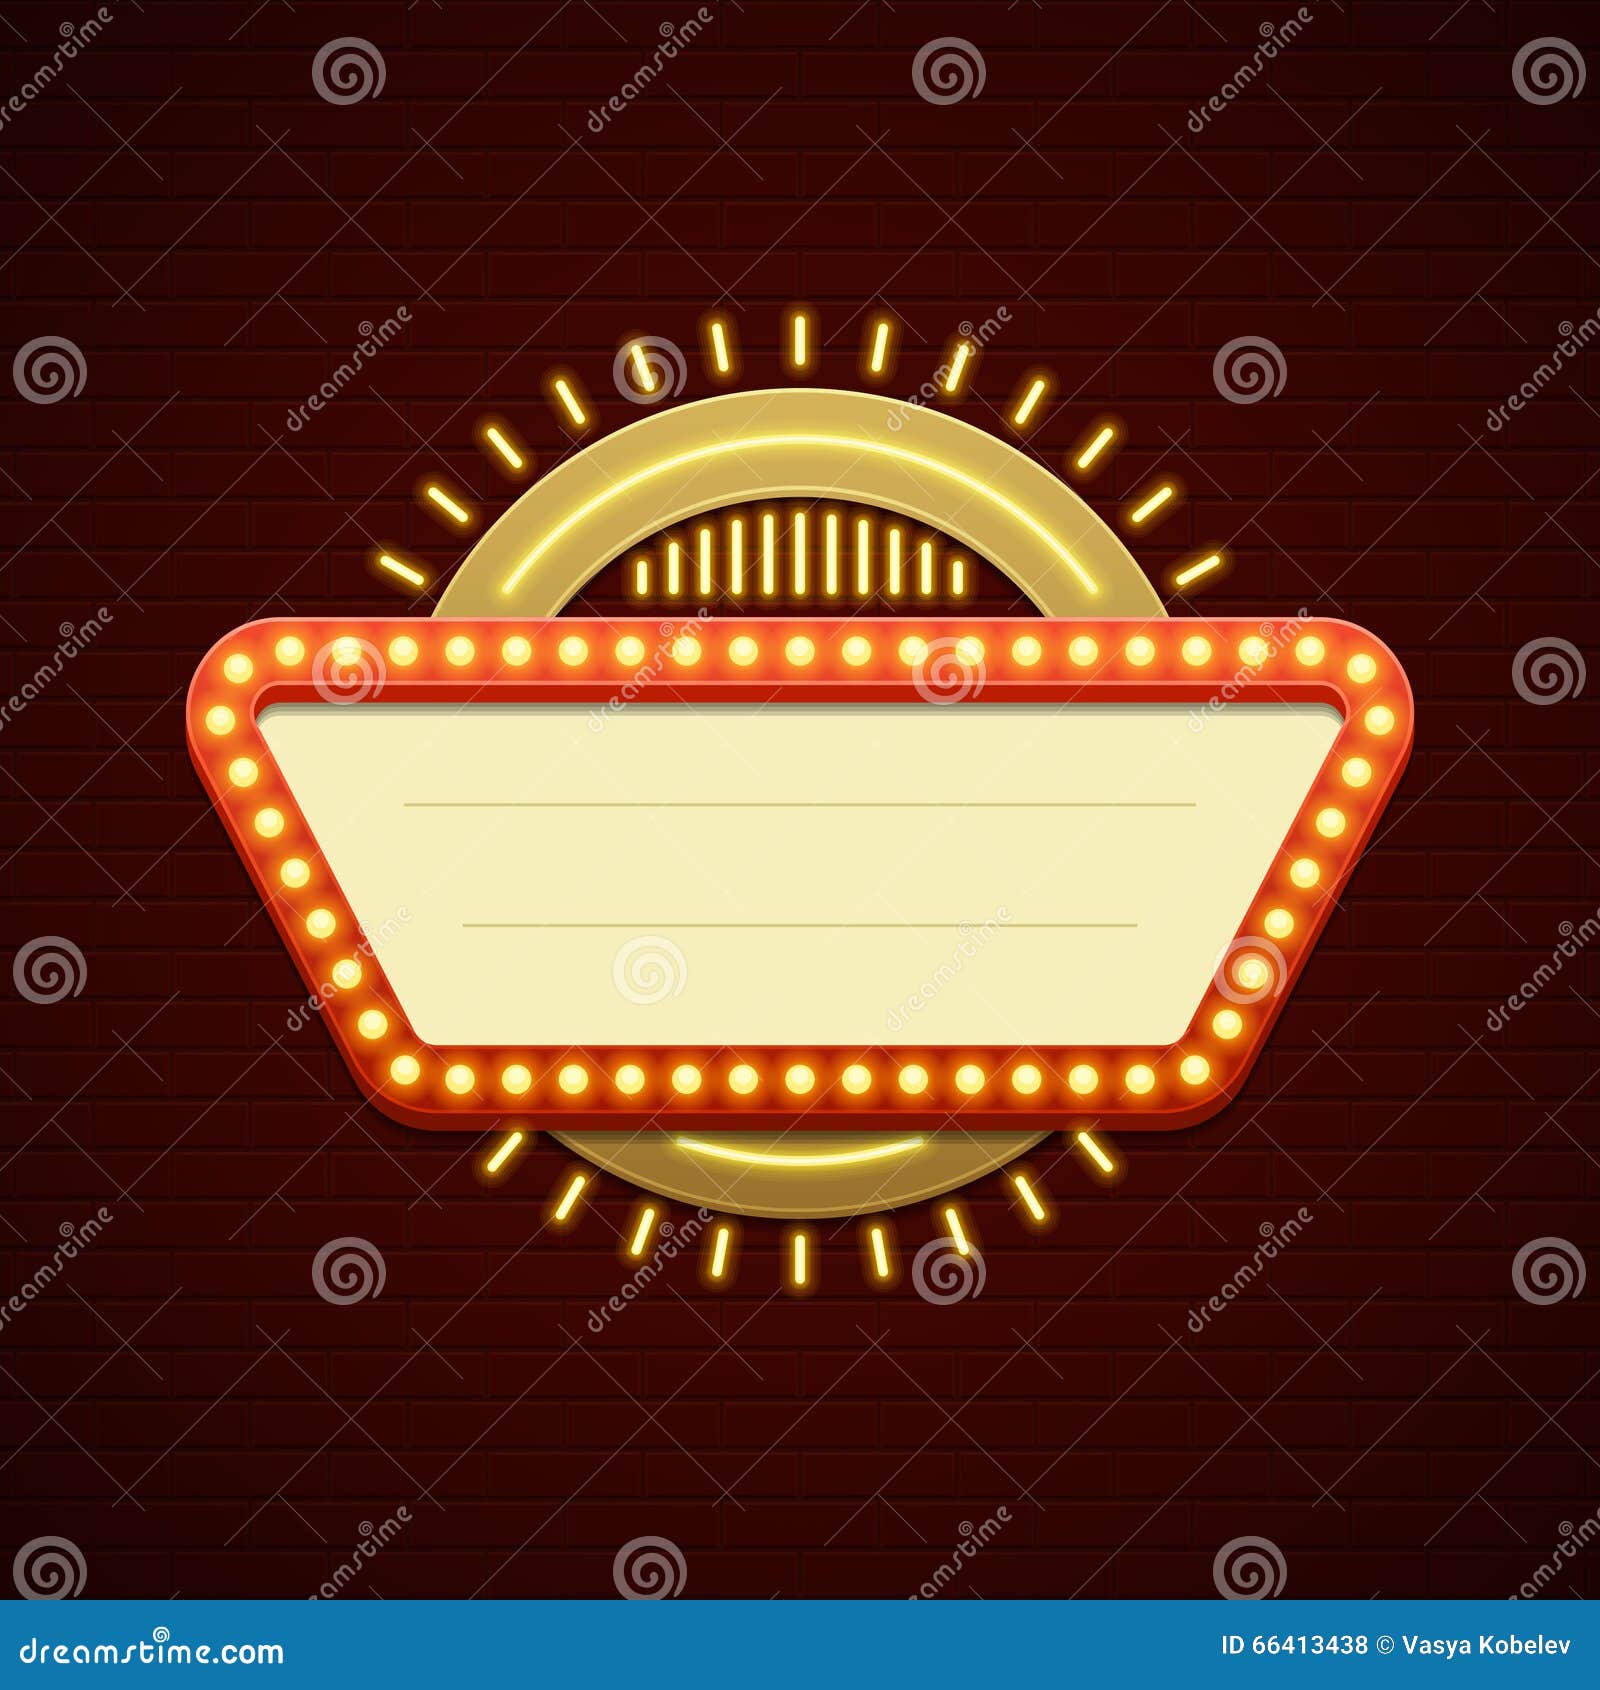 Retro Showtime Sign Design. Cinema Signage Light Bulbs Frame and Neon Lamps  on Brick Wall Background Stock Vector - Illustration of round, decoration:  66413438